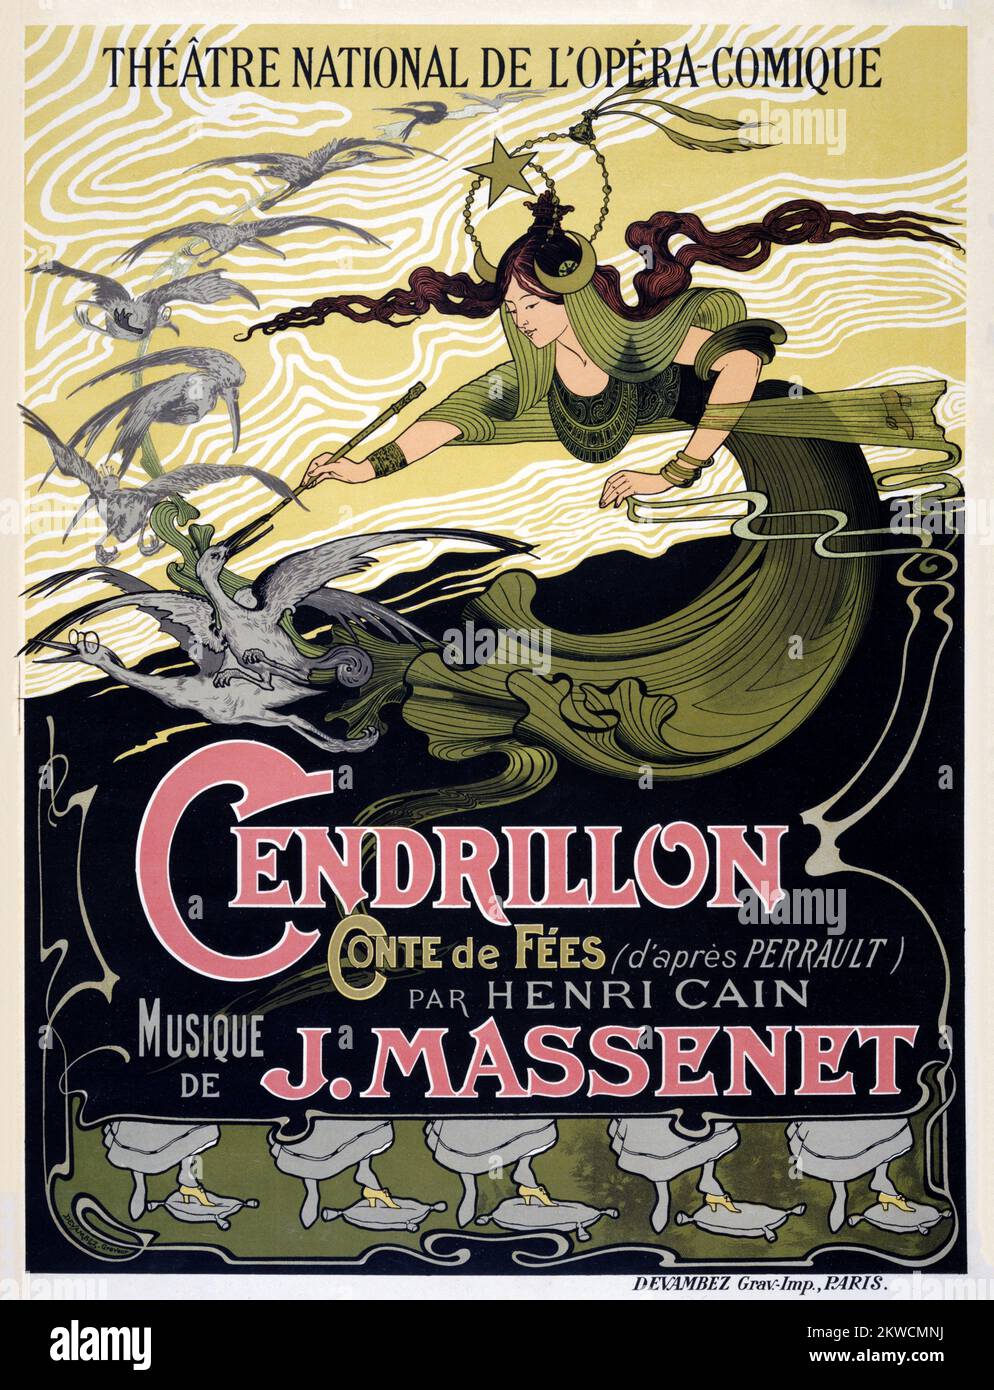 Théâtre National de l'Opéra-comique. Cendrillon by Emile Bertrand (1842-1912). Poster published in 1900 in France. Stock Photo